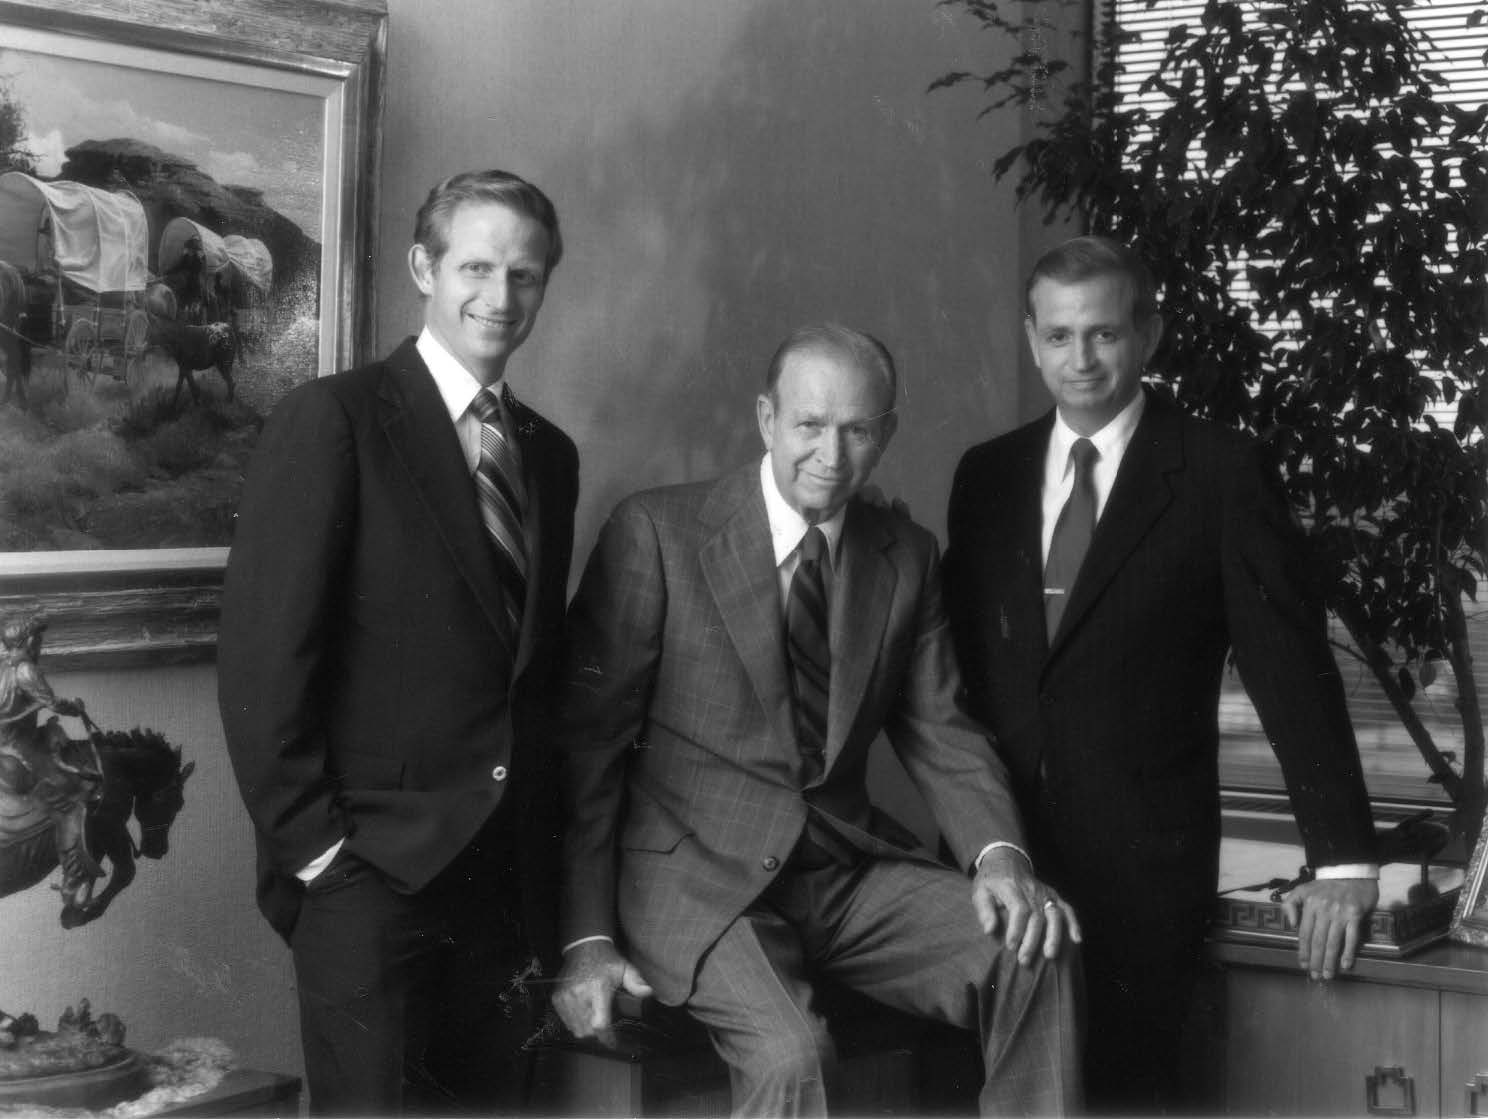 Dick, J.W., and Bill in the office, ca. 1965.